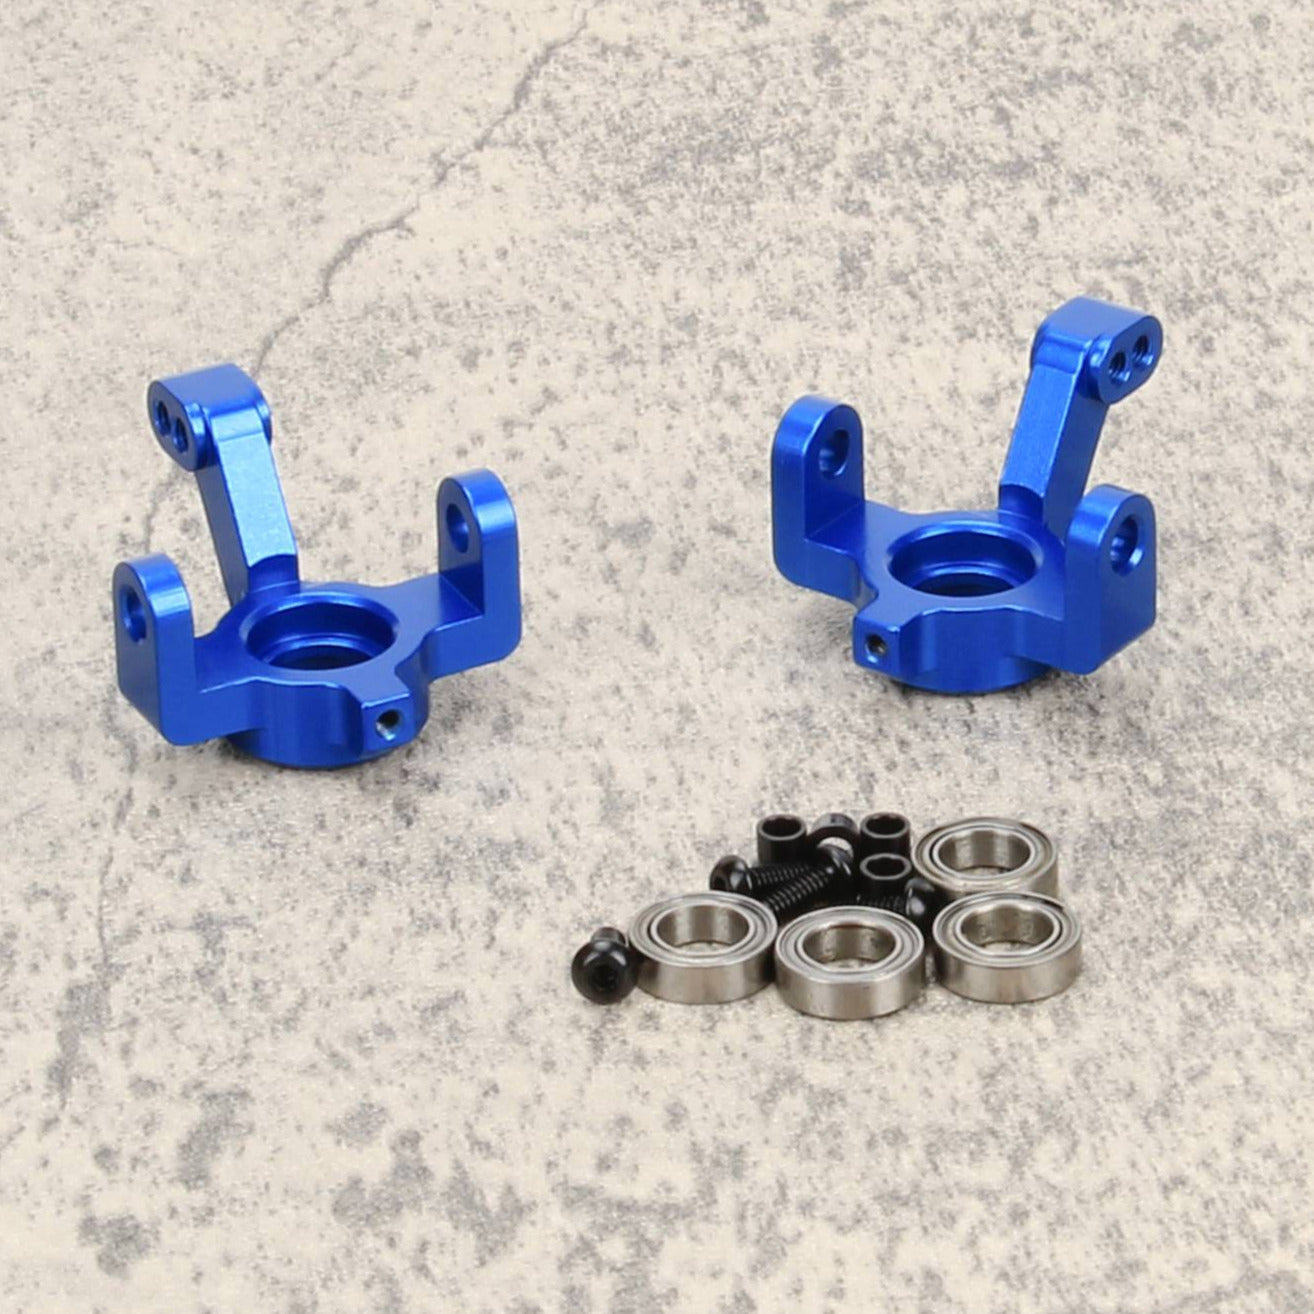 RCAWD TRAXXAS SLASH Blue RCAWD RC Aluminum Caster Blocks Steering Blocks for 1/18 Traxxas Upgrade Parts